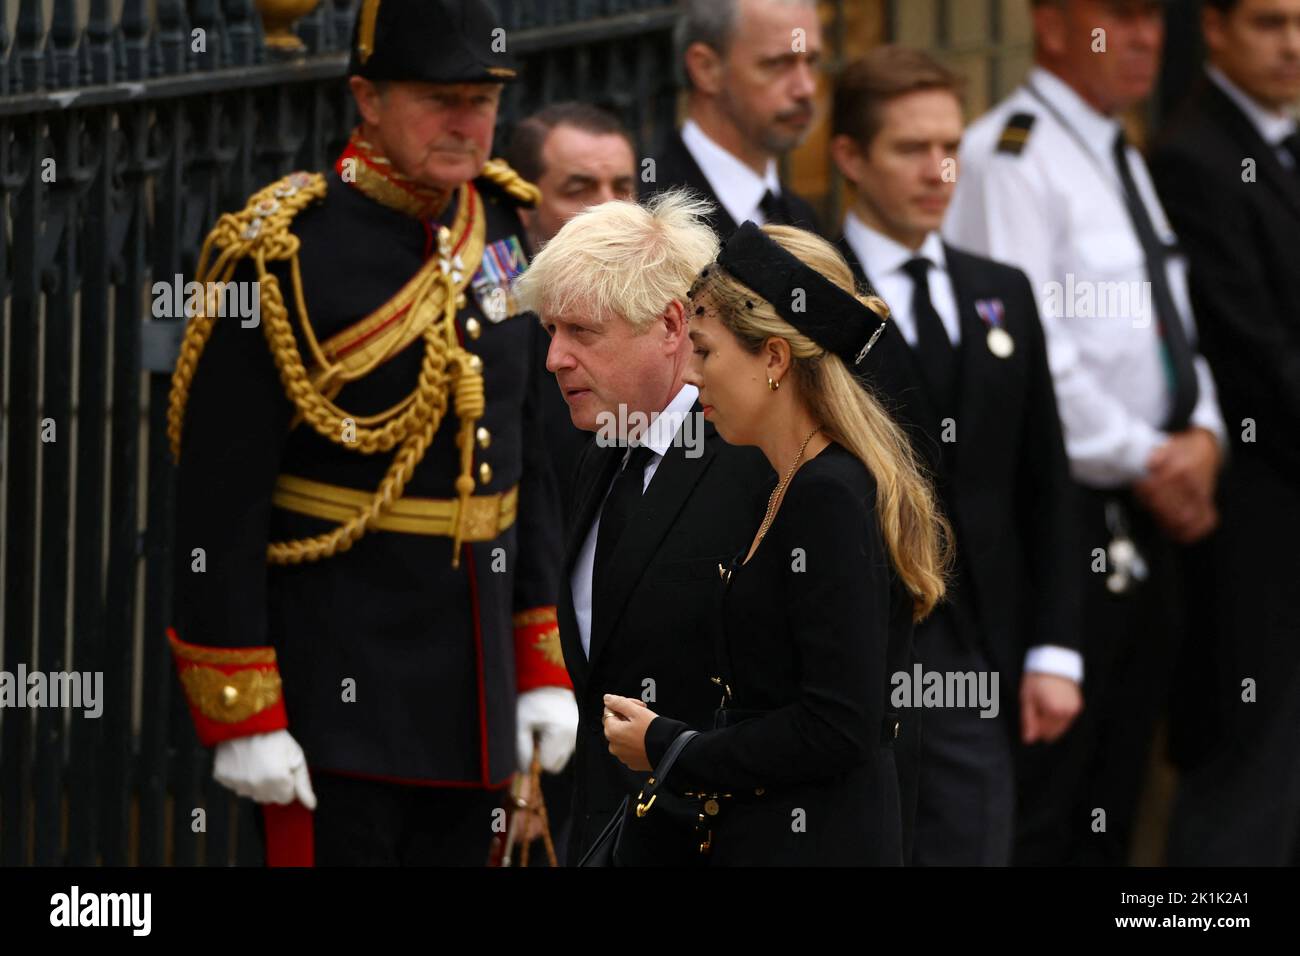 Former British Prime Minister Boris Johnson arrives at Westminster Abbey on the day of the state funeral and burial of Britain's Queen Elizabeth, in London, Britain, September 19, 2022.  REUTERS/Kai Pfaffenbach Stock Photo